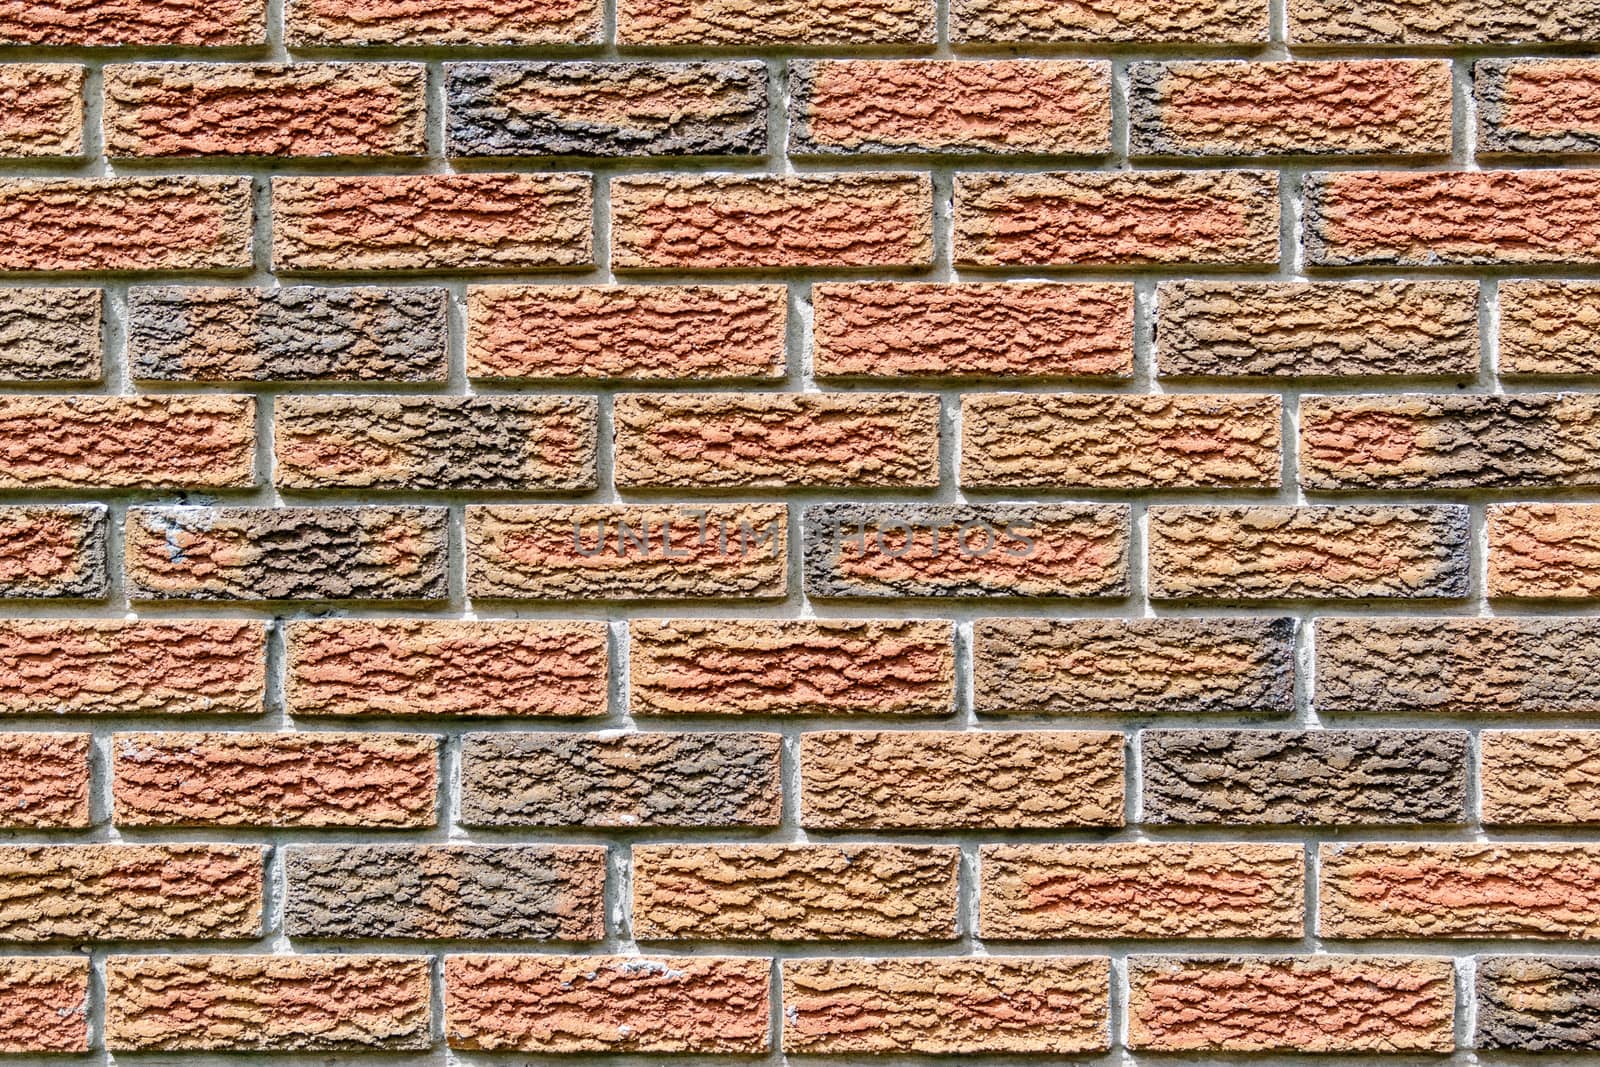 Details of a red brick wall